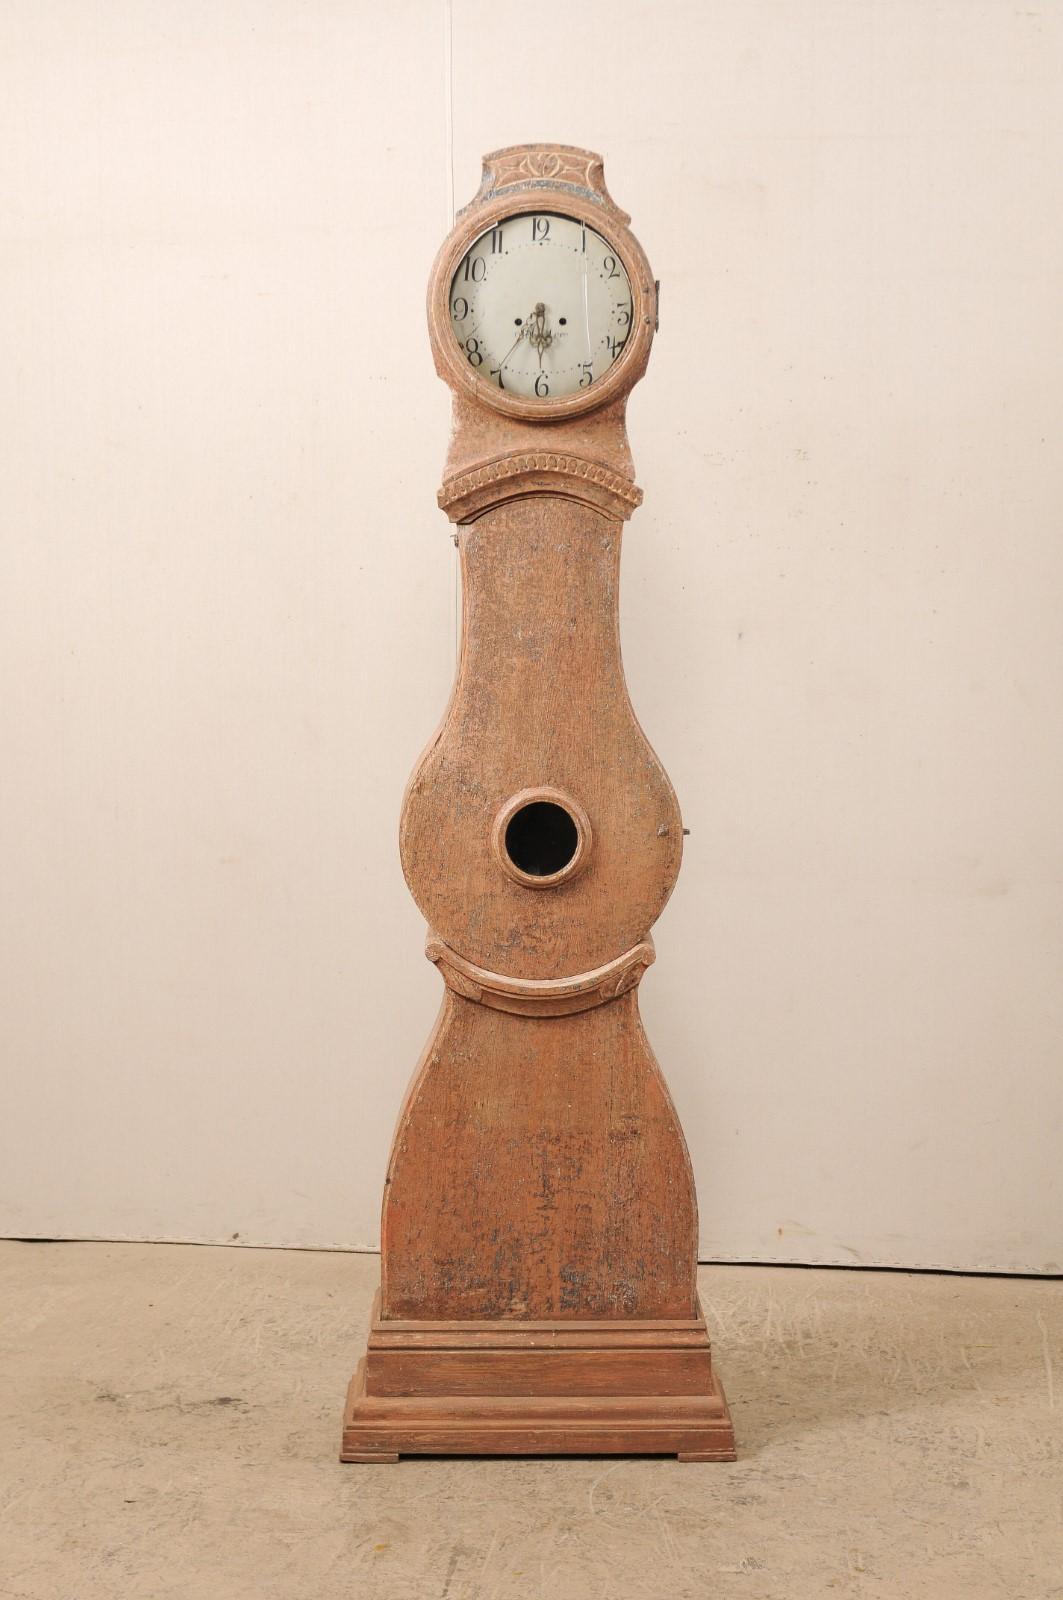 A 19th century Swedish long-case clock with dry-scraped finish. This antique clock from Sweden, circa 1820s, is topped with a subtly raised and carved crest, atop a round-shaped head. A nicely trimmed molding accents the neck, just above the